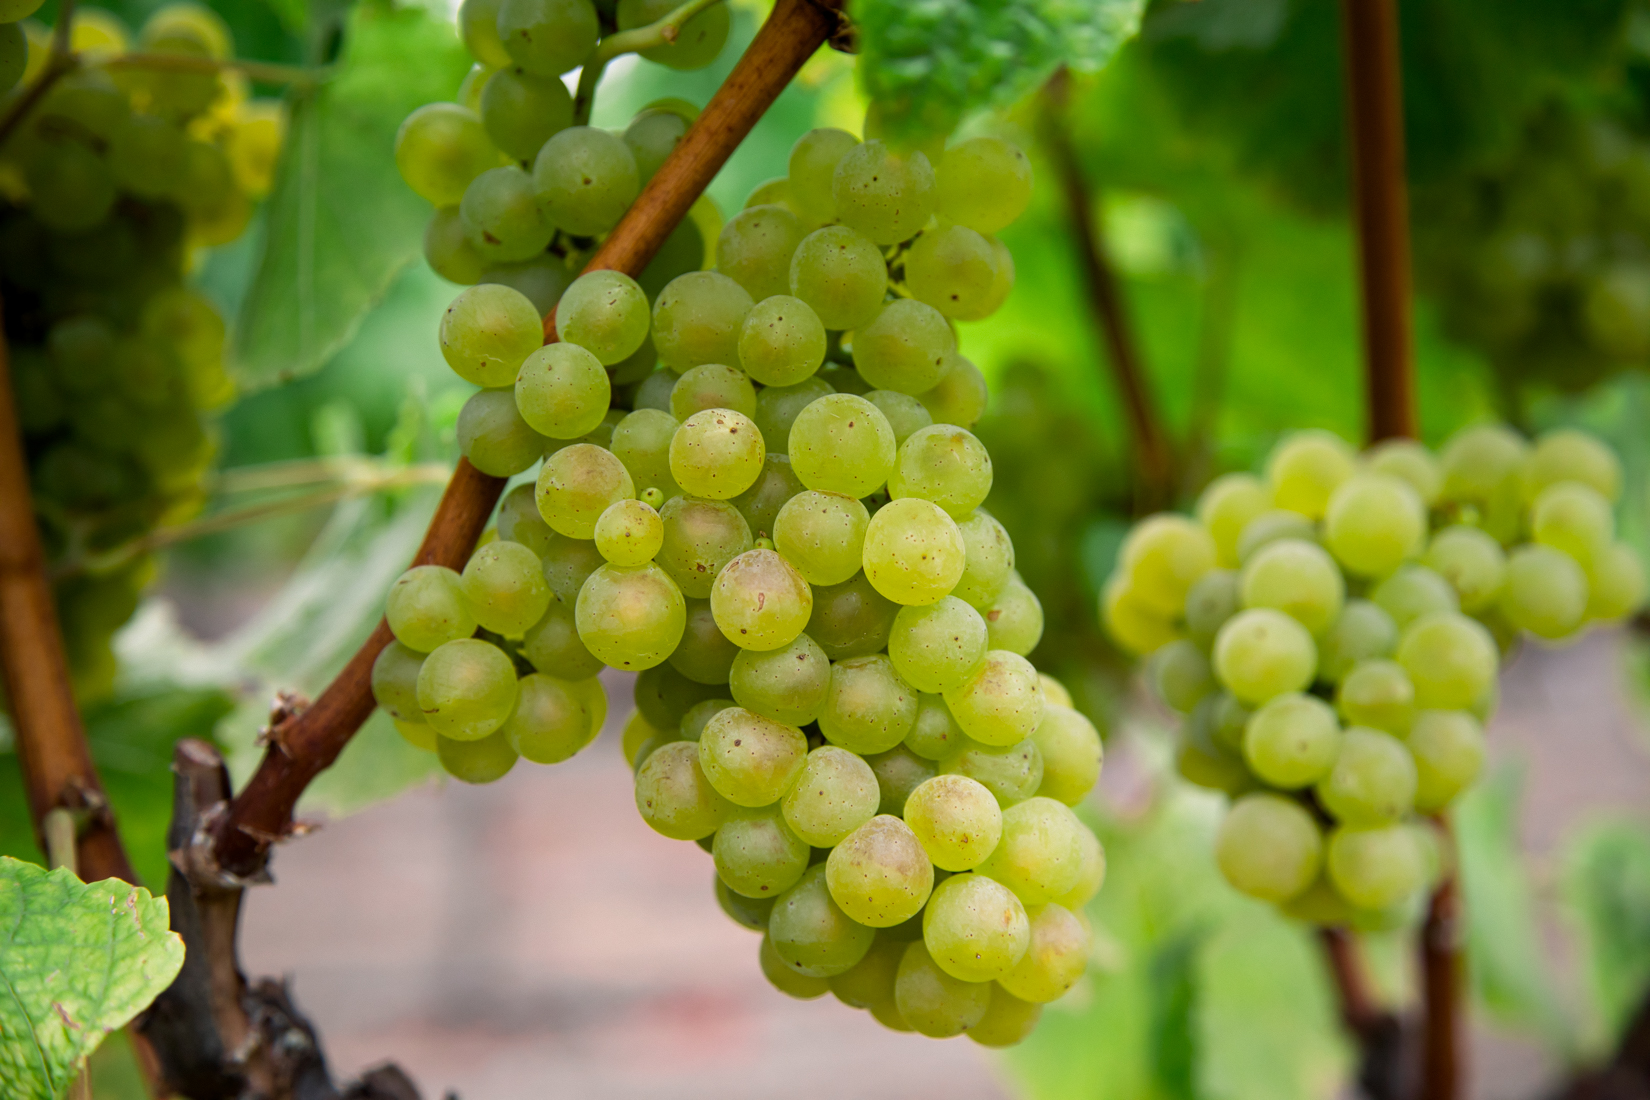 Close-up of green chardonnay grapes on the vine with a second bundle behind.